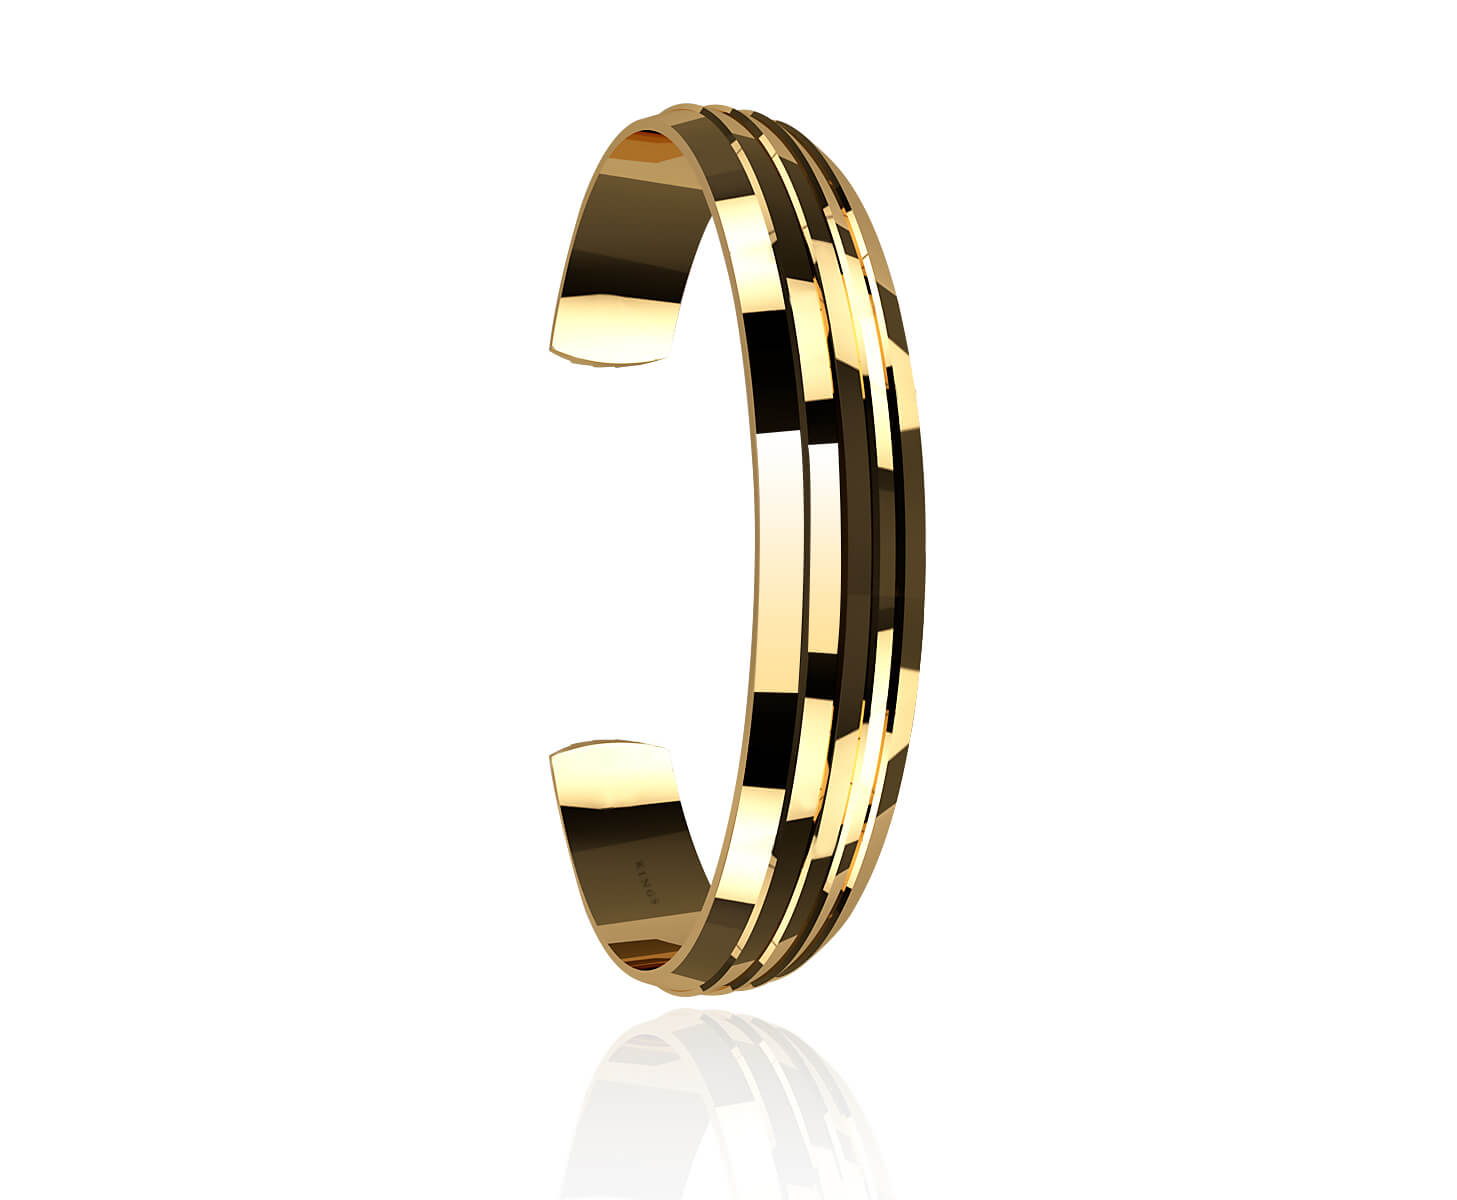 Steps shaped yellow gold cuff bracelet 11mm by Kings